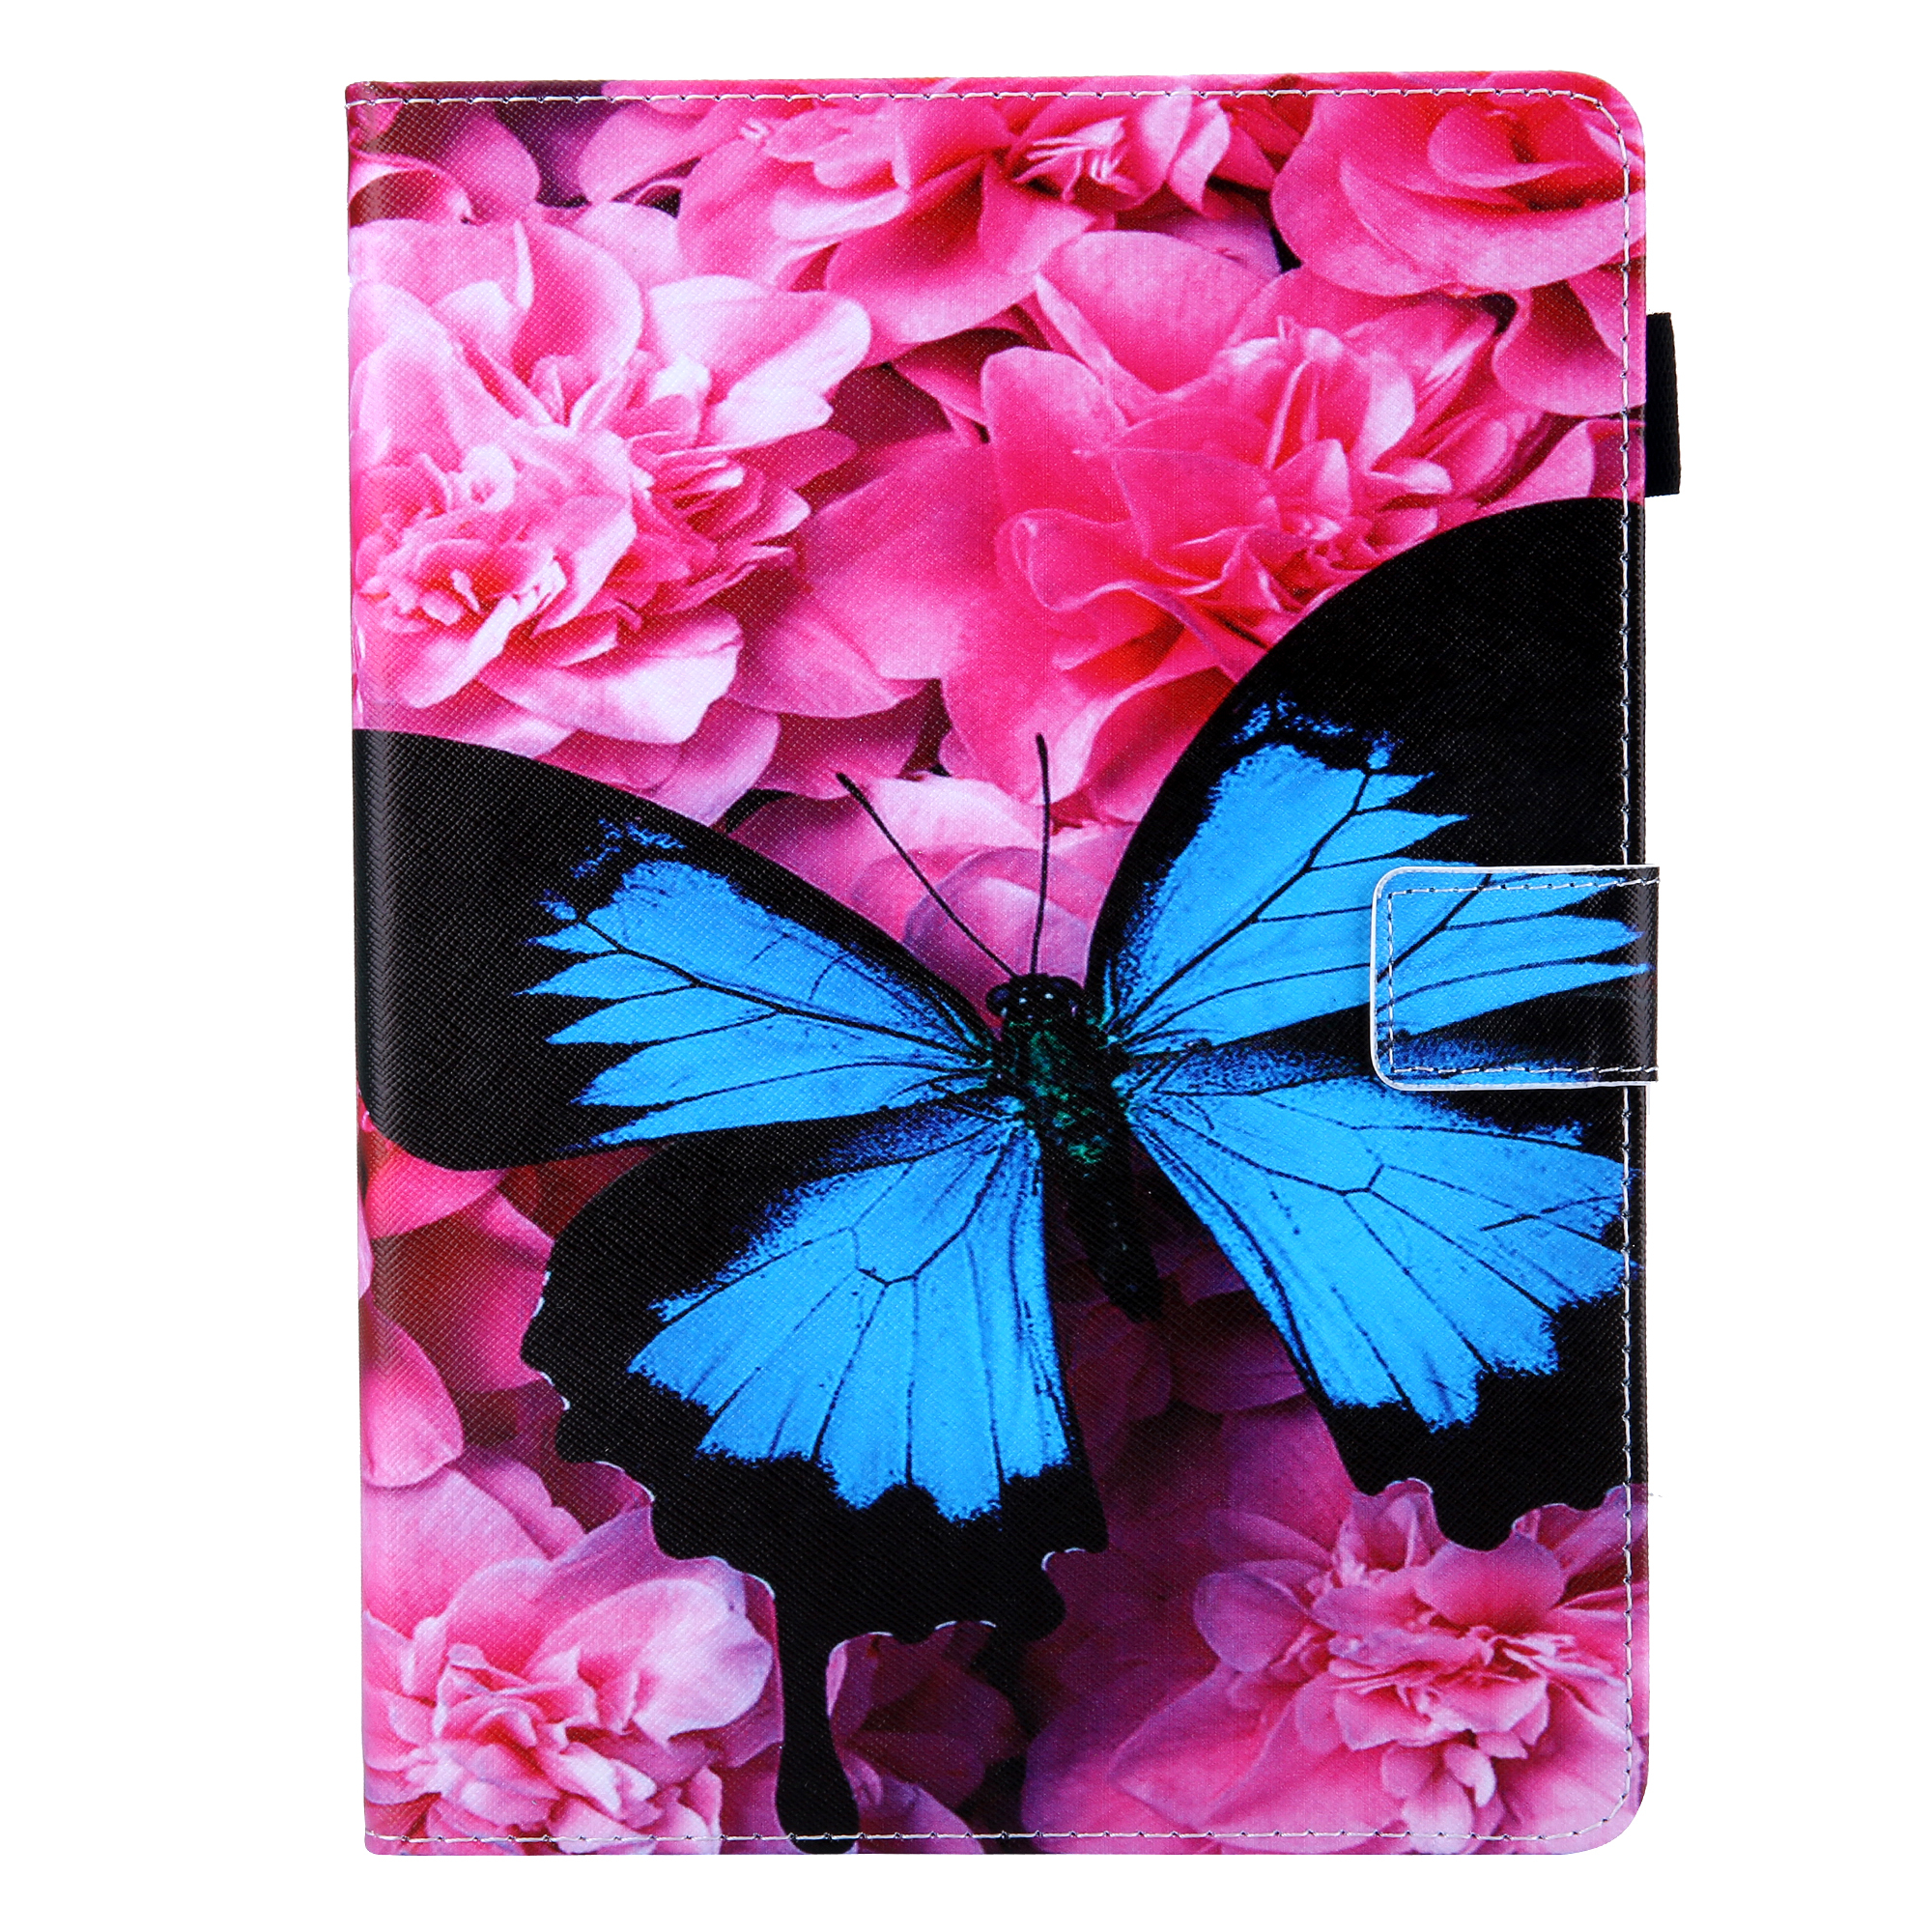 Fire HD 8 Case 2020, Fire HD 8 Plus Case 2020, Allytech PU Leather Slim Shockproof Auto Sleep Wake Folio Flip Smart Cover Pencil Holder Book Style Case for All-New Fire HD 8 10th Gen,Butterfly - image 1 of 7